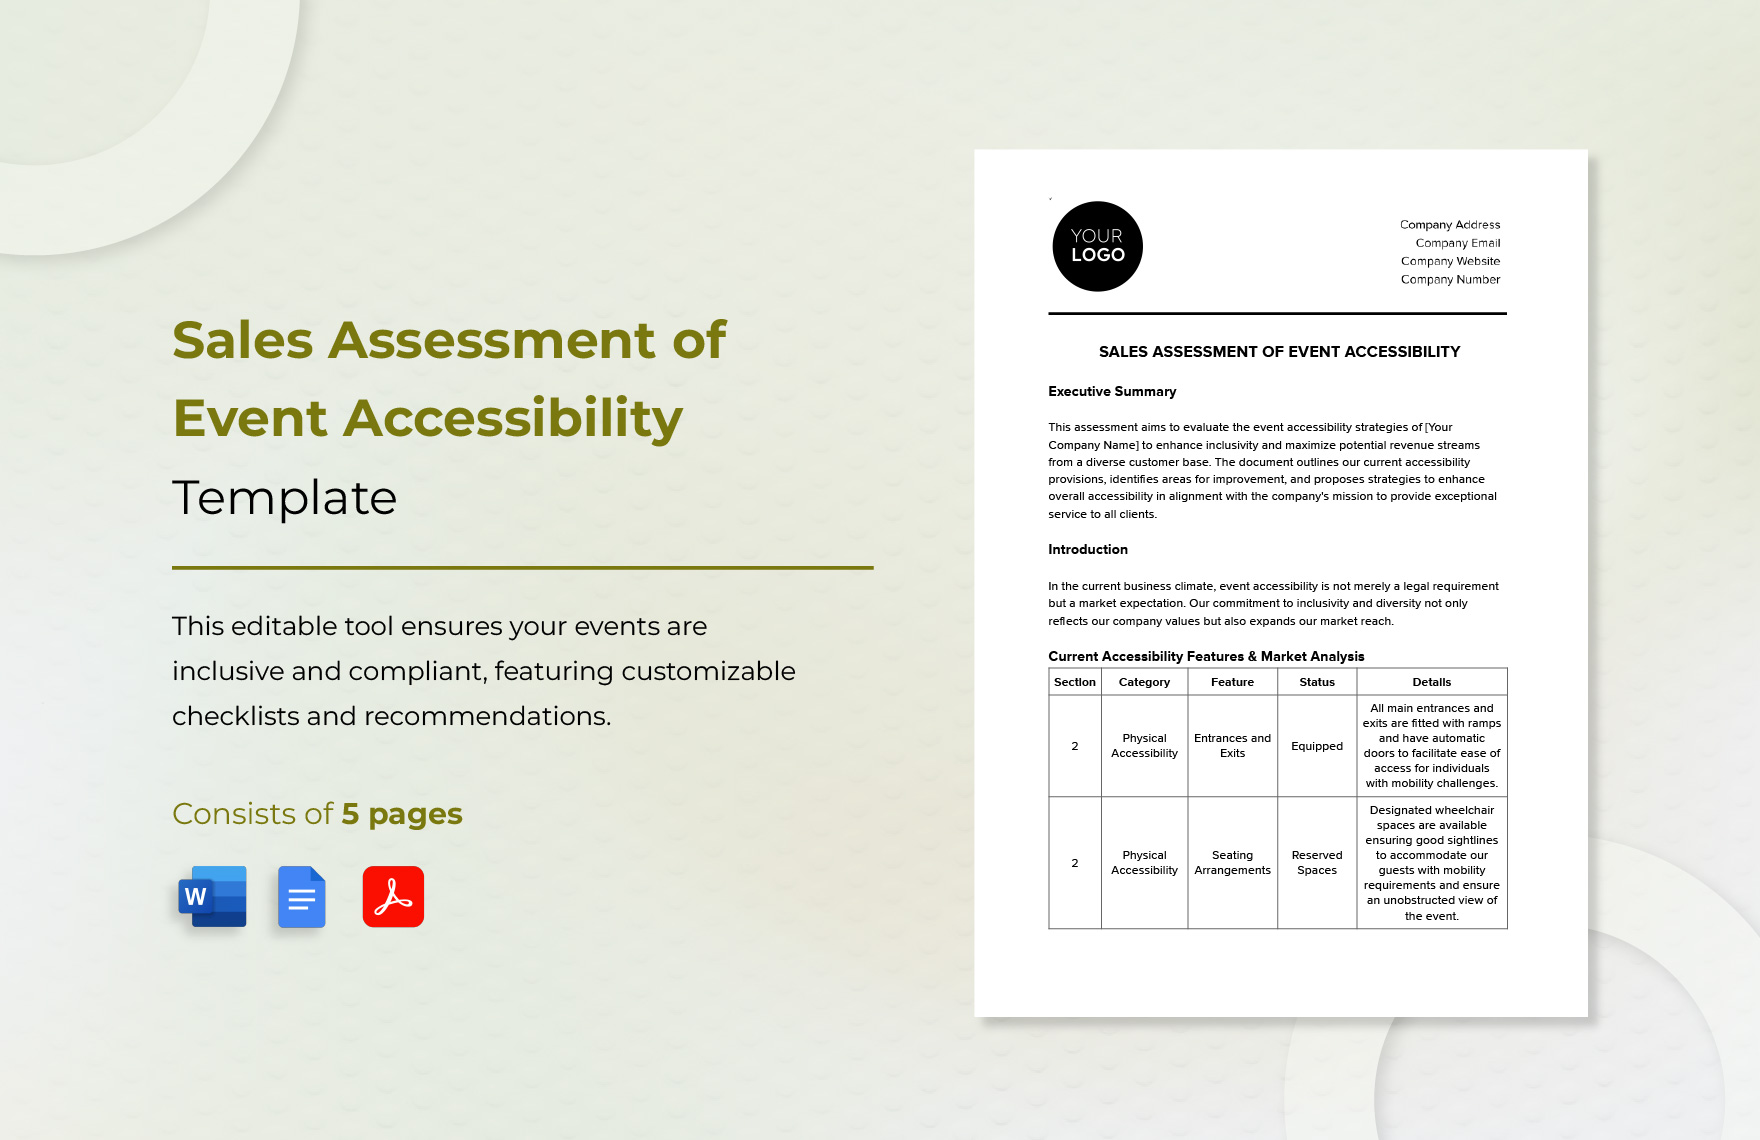 Sales Assessment of Event Accessibility Template